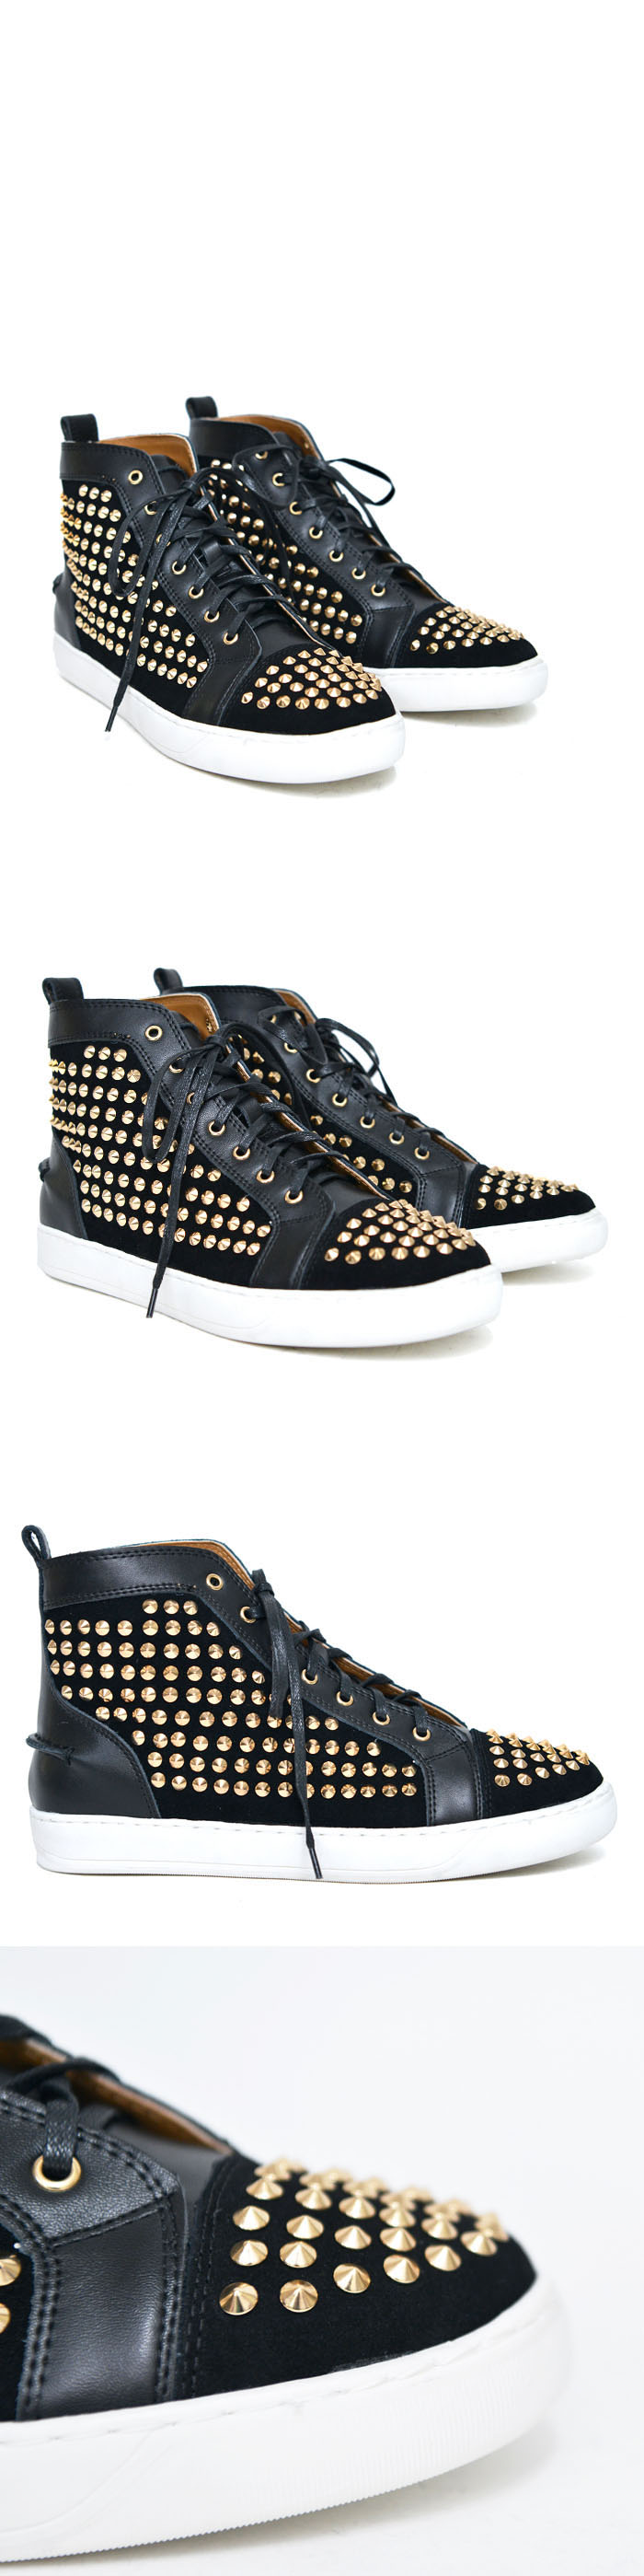 Shoes :: Sale) Studs Leather High Top Sneakers-Shoes 530